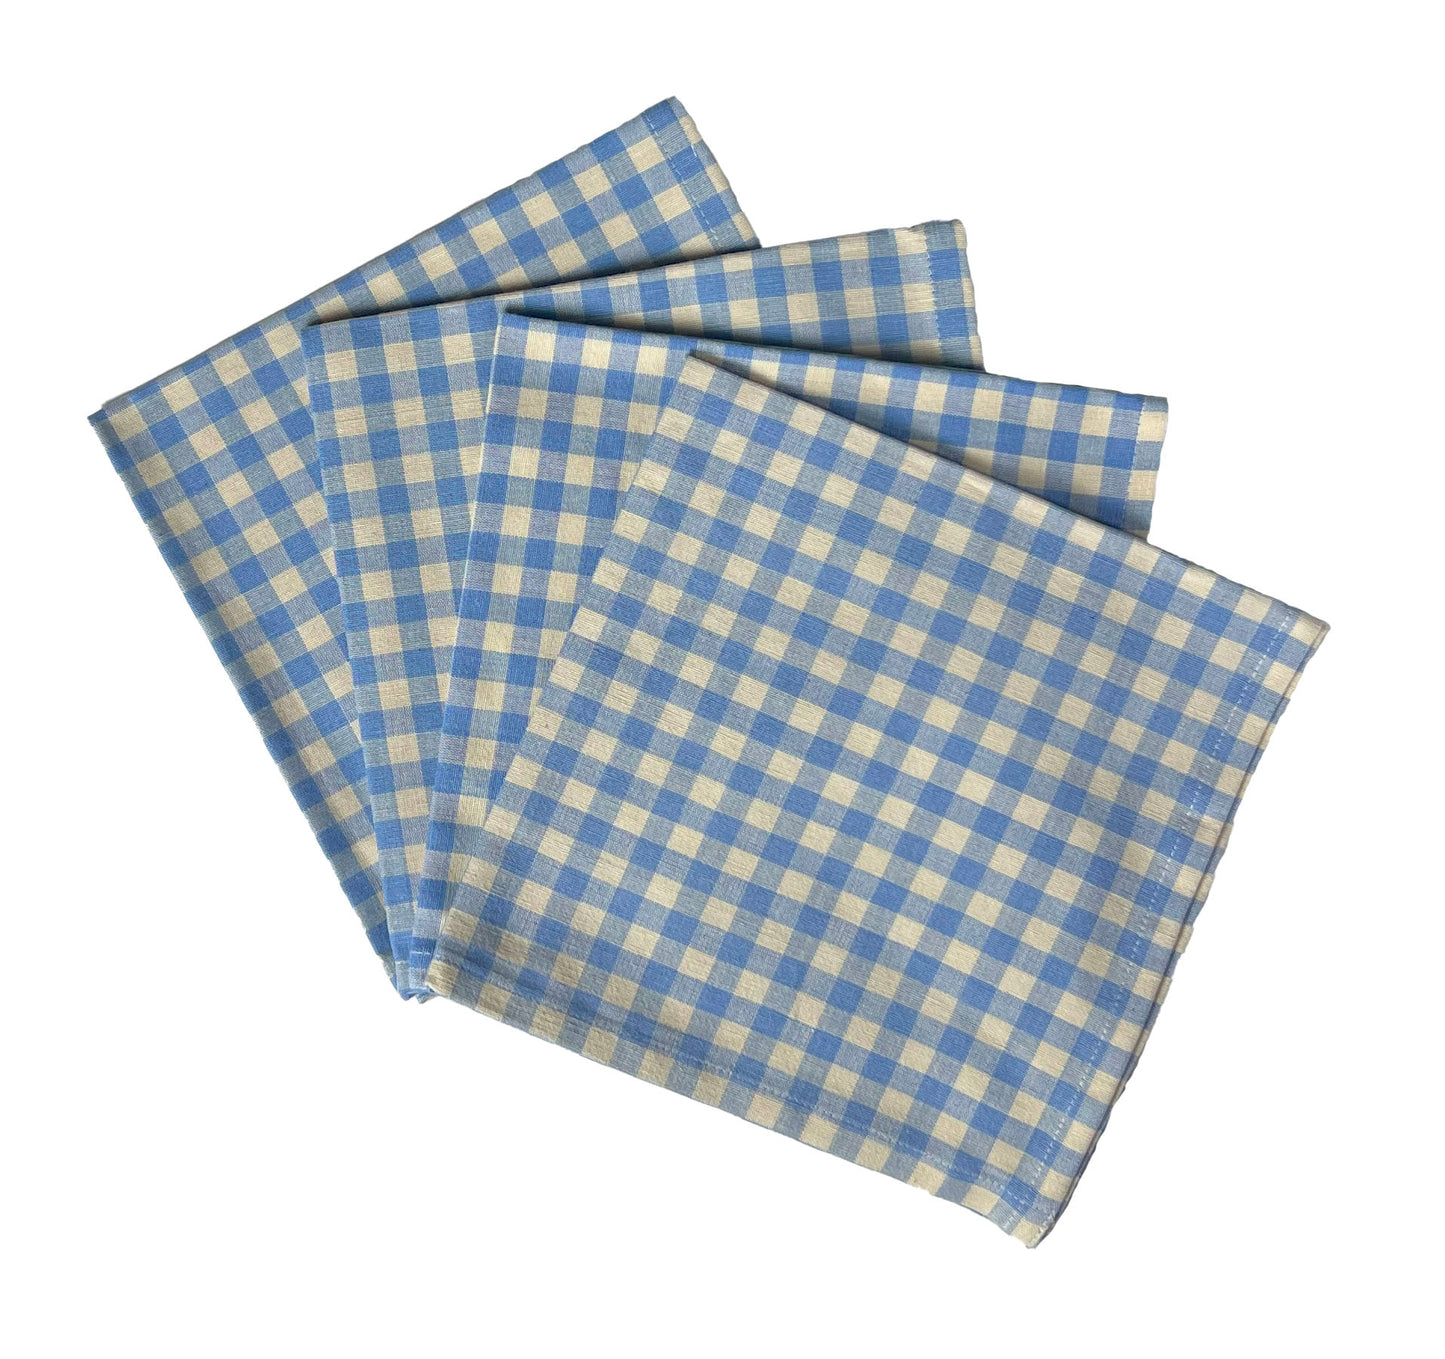 set of four blue gingham checked ziro napkins from sterck & co.